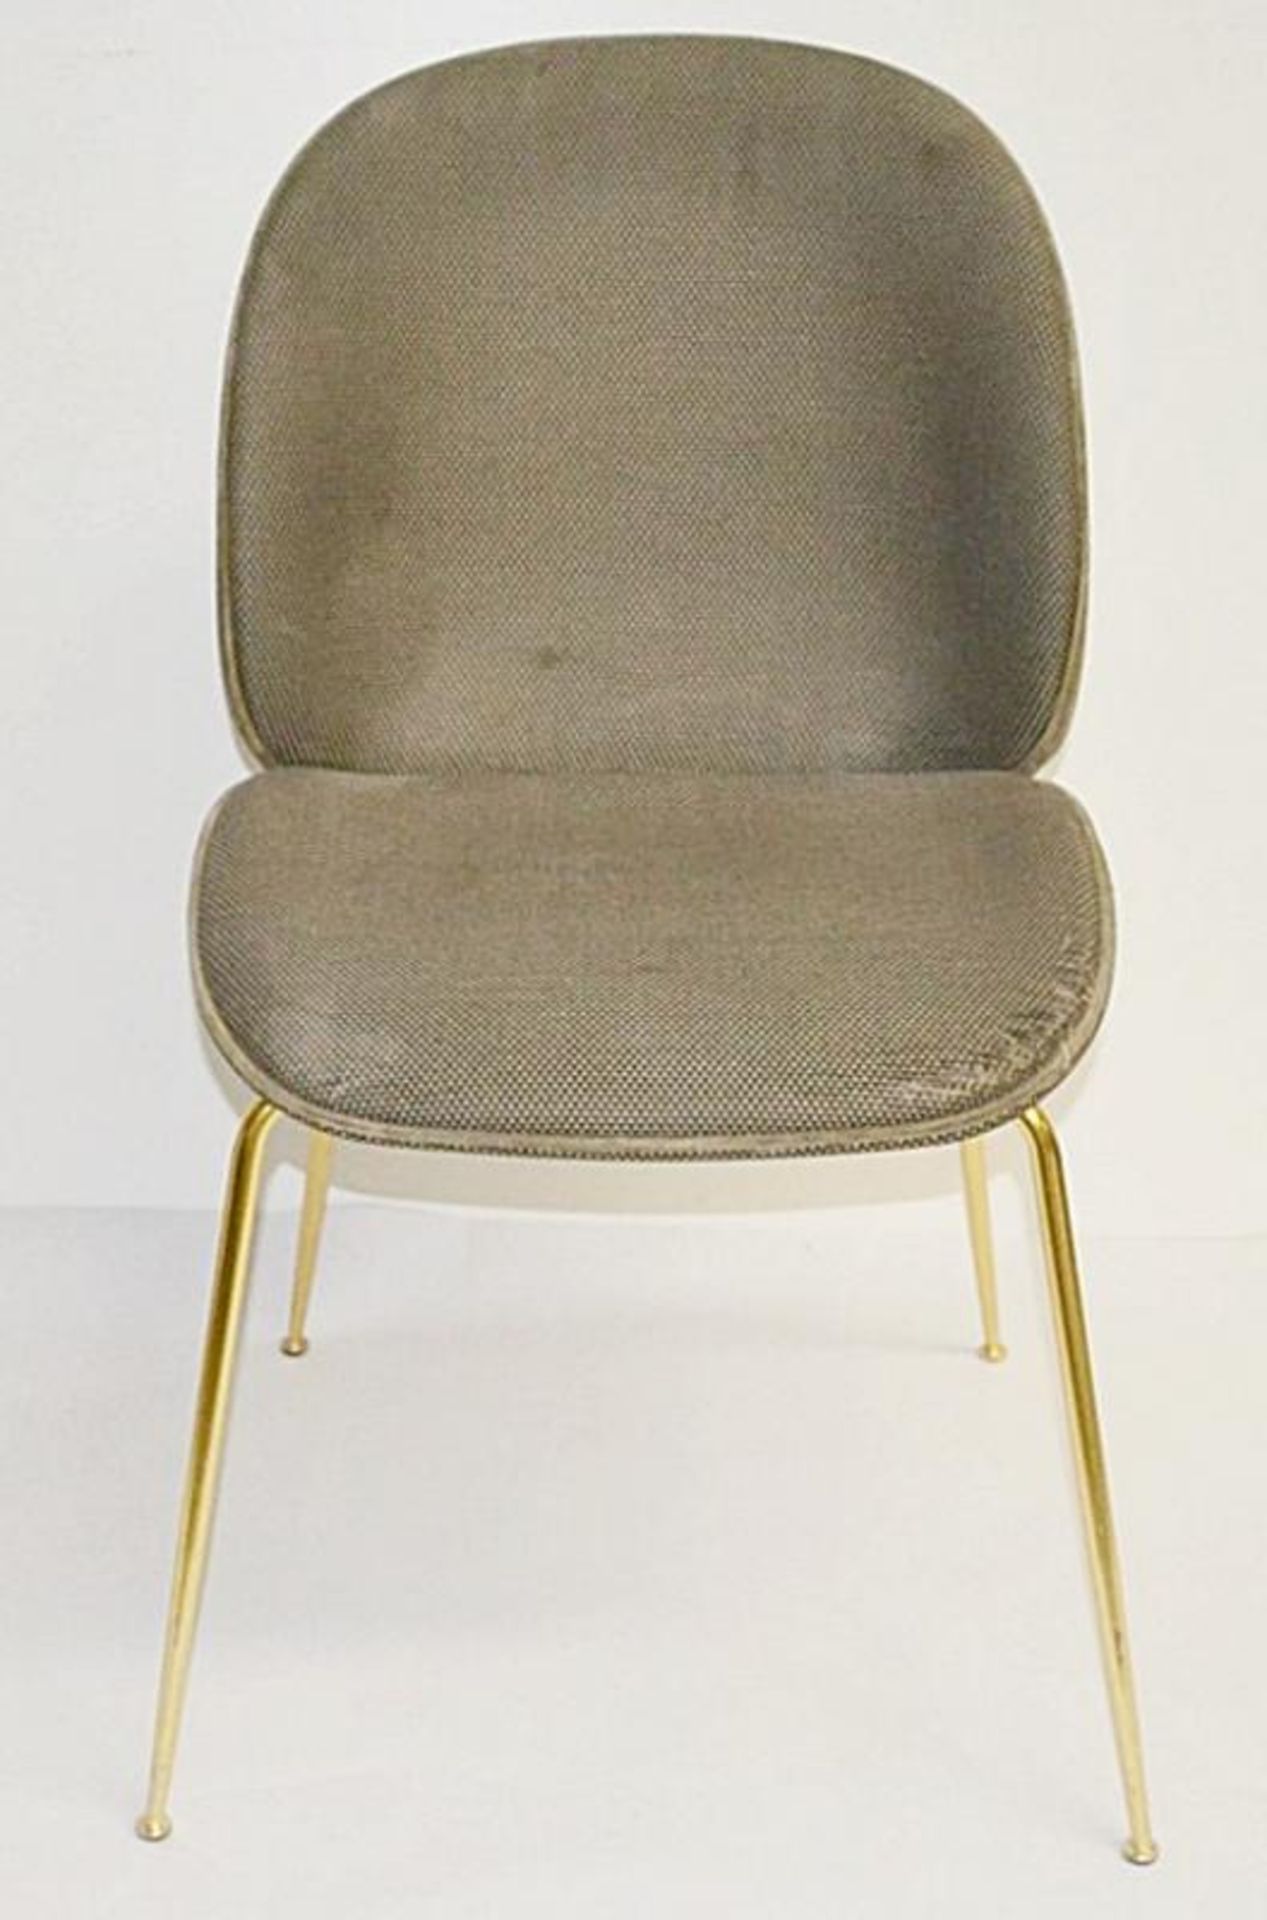 1 x GUBI 'Beetle Chair' - Designed By GamFratesi - Used, Please Read Condition Report - Dimensions: - Image 4 of 6